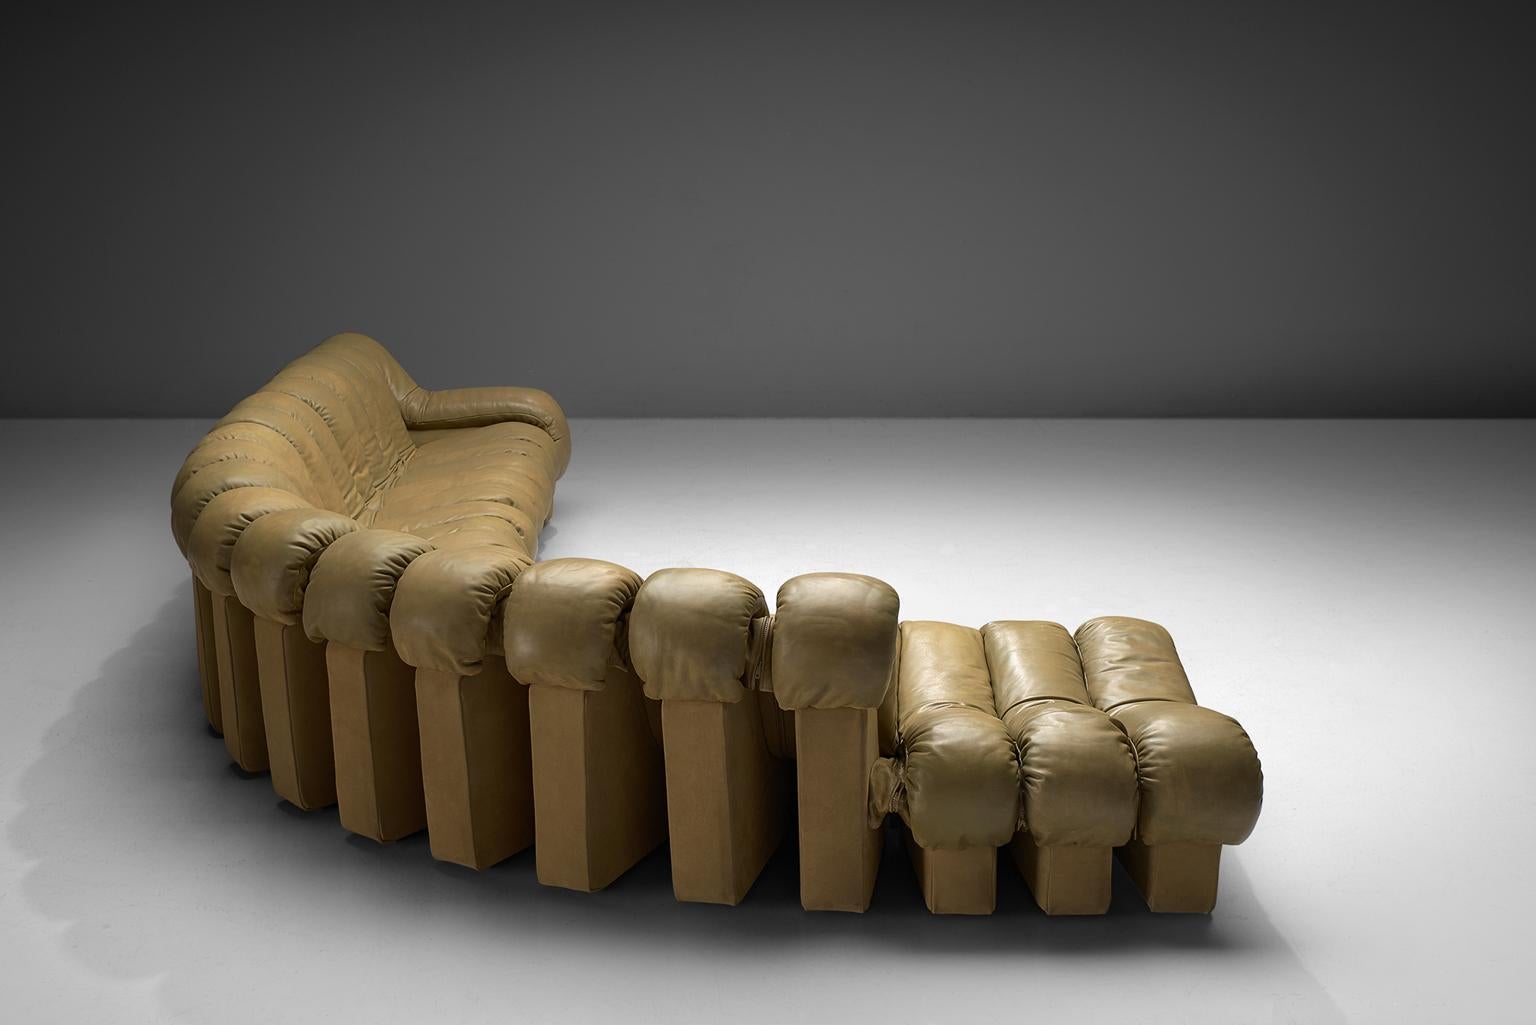 De Sede ‘Snake’ DS-600, in beige colored leather and beige, Switzerland, 1972. 

De Sede 'Non Stop' sectional sofa containing 20 pieces in beige colored leather, of which 16 centre pieces, 3 ottomans and one higher armrest. Any number of pieces